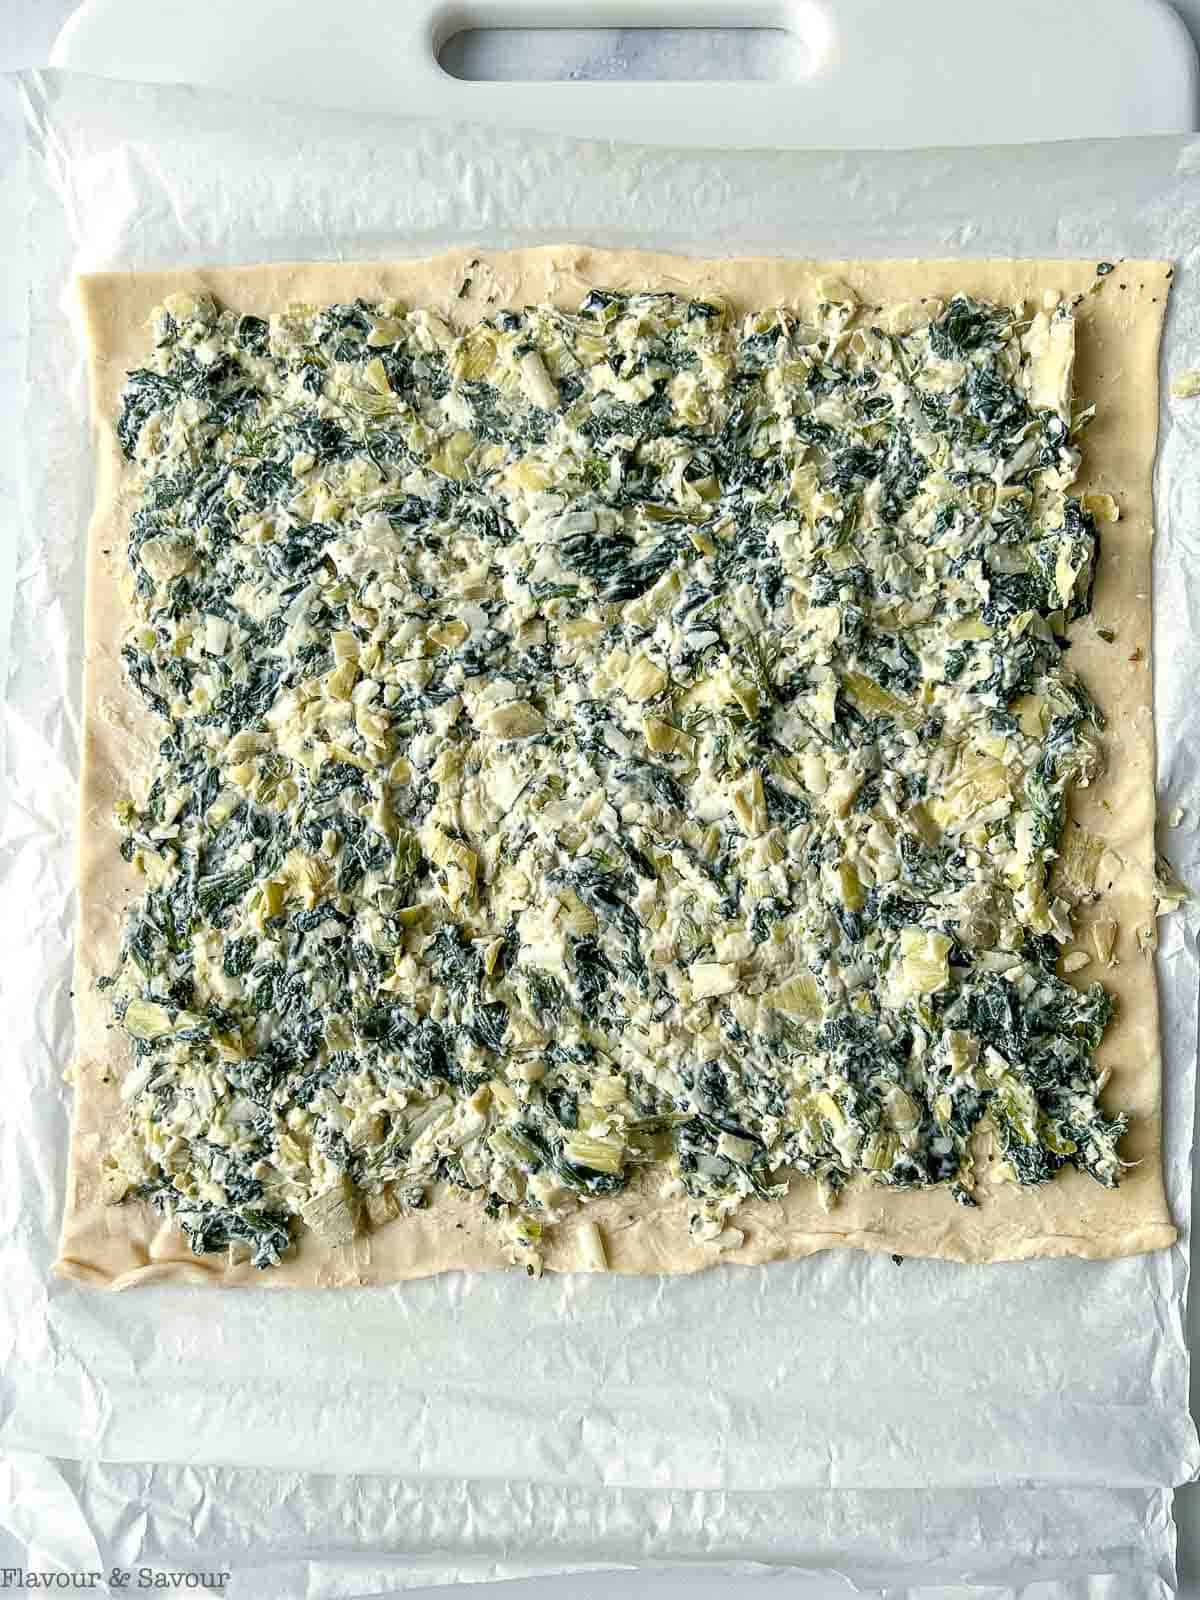 Puff pastry spread with spinach artichoke filling.